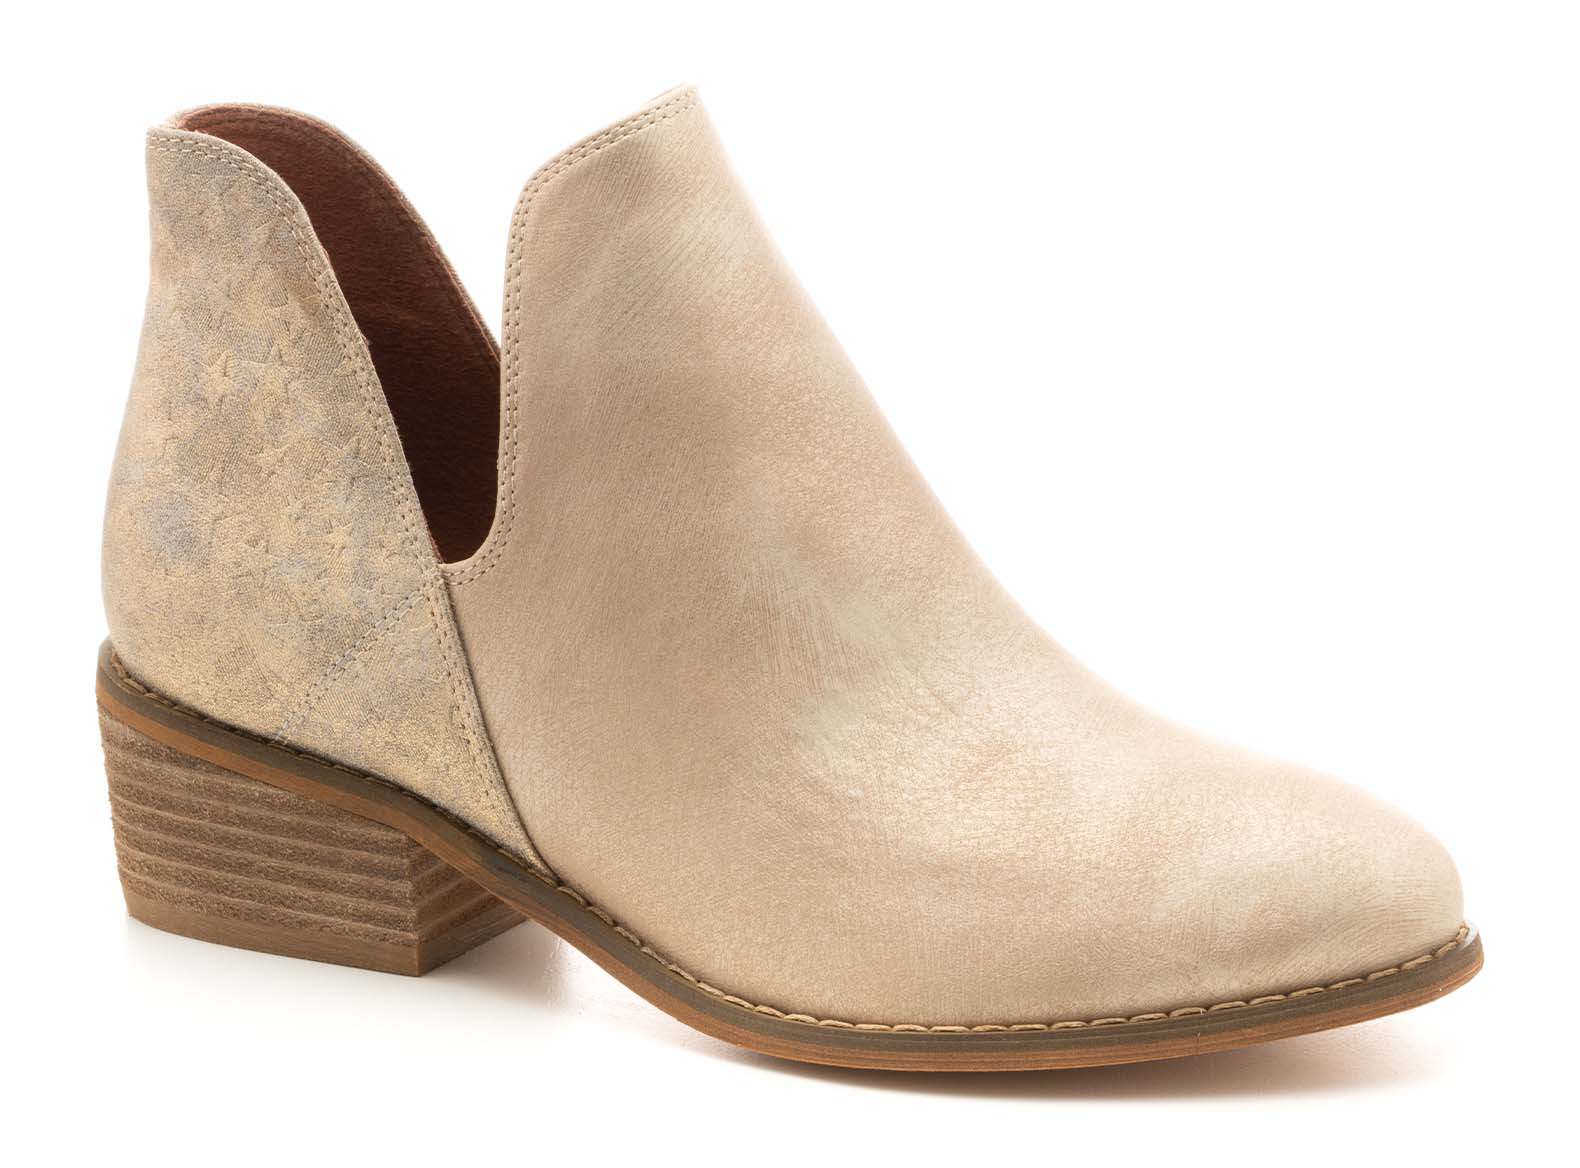 Corkys Shoes - Wayland Gold Stars Booties   SALE 40% OFF  NOW $42.95